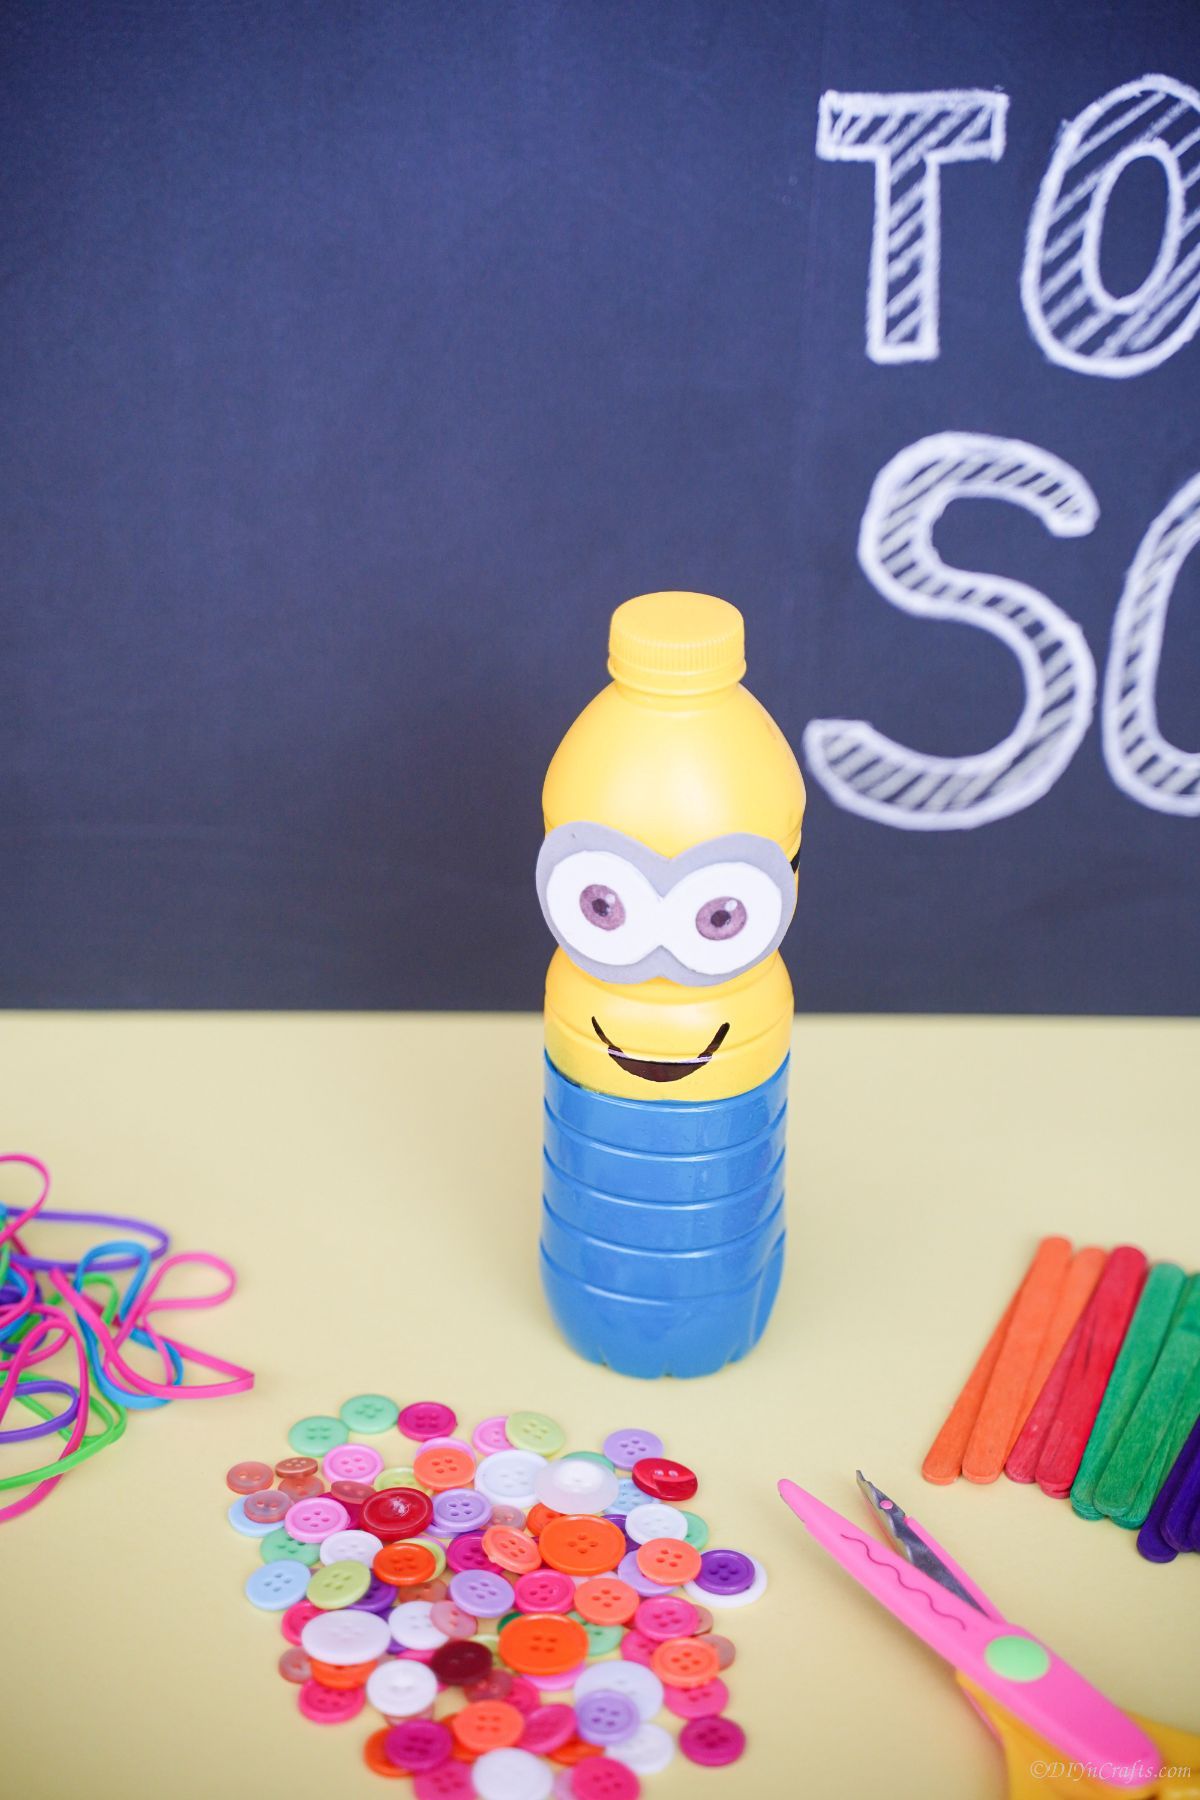 plastic bottle minion on table with chalkboard in background